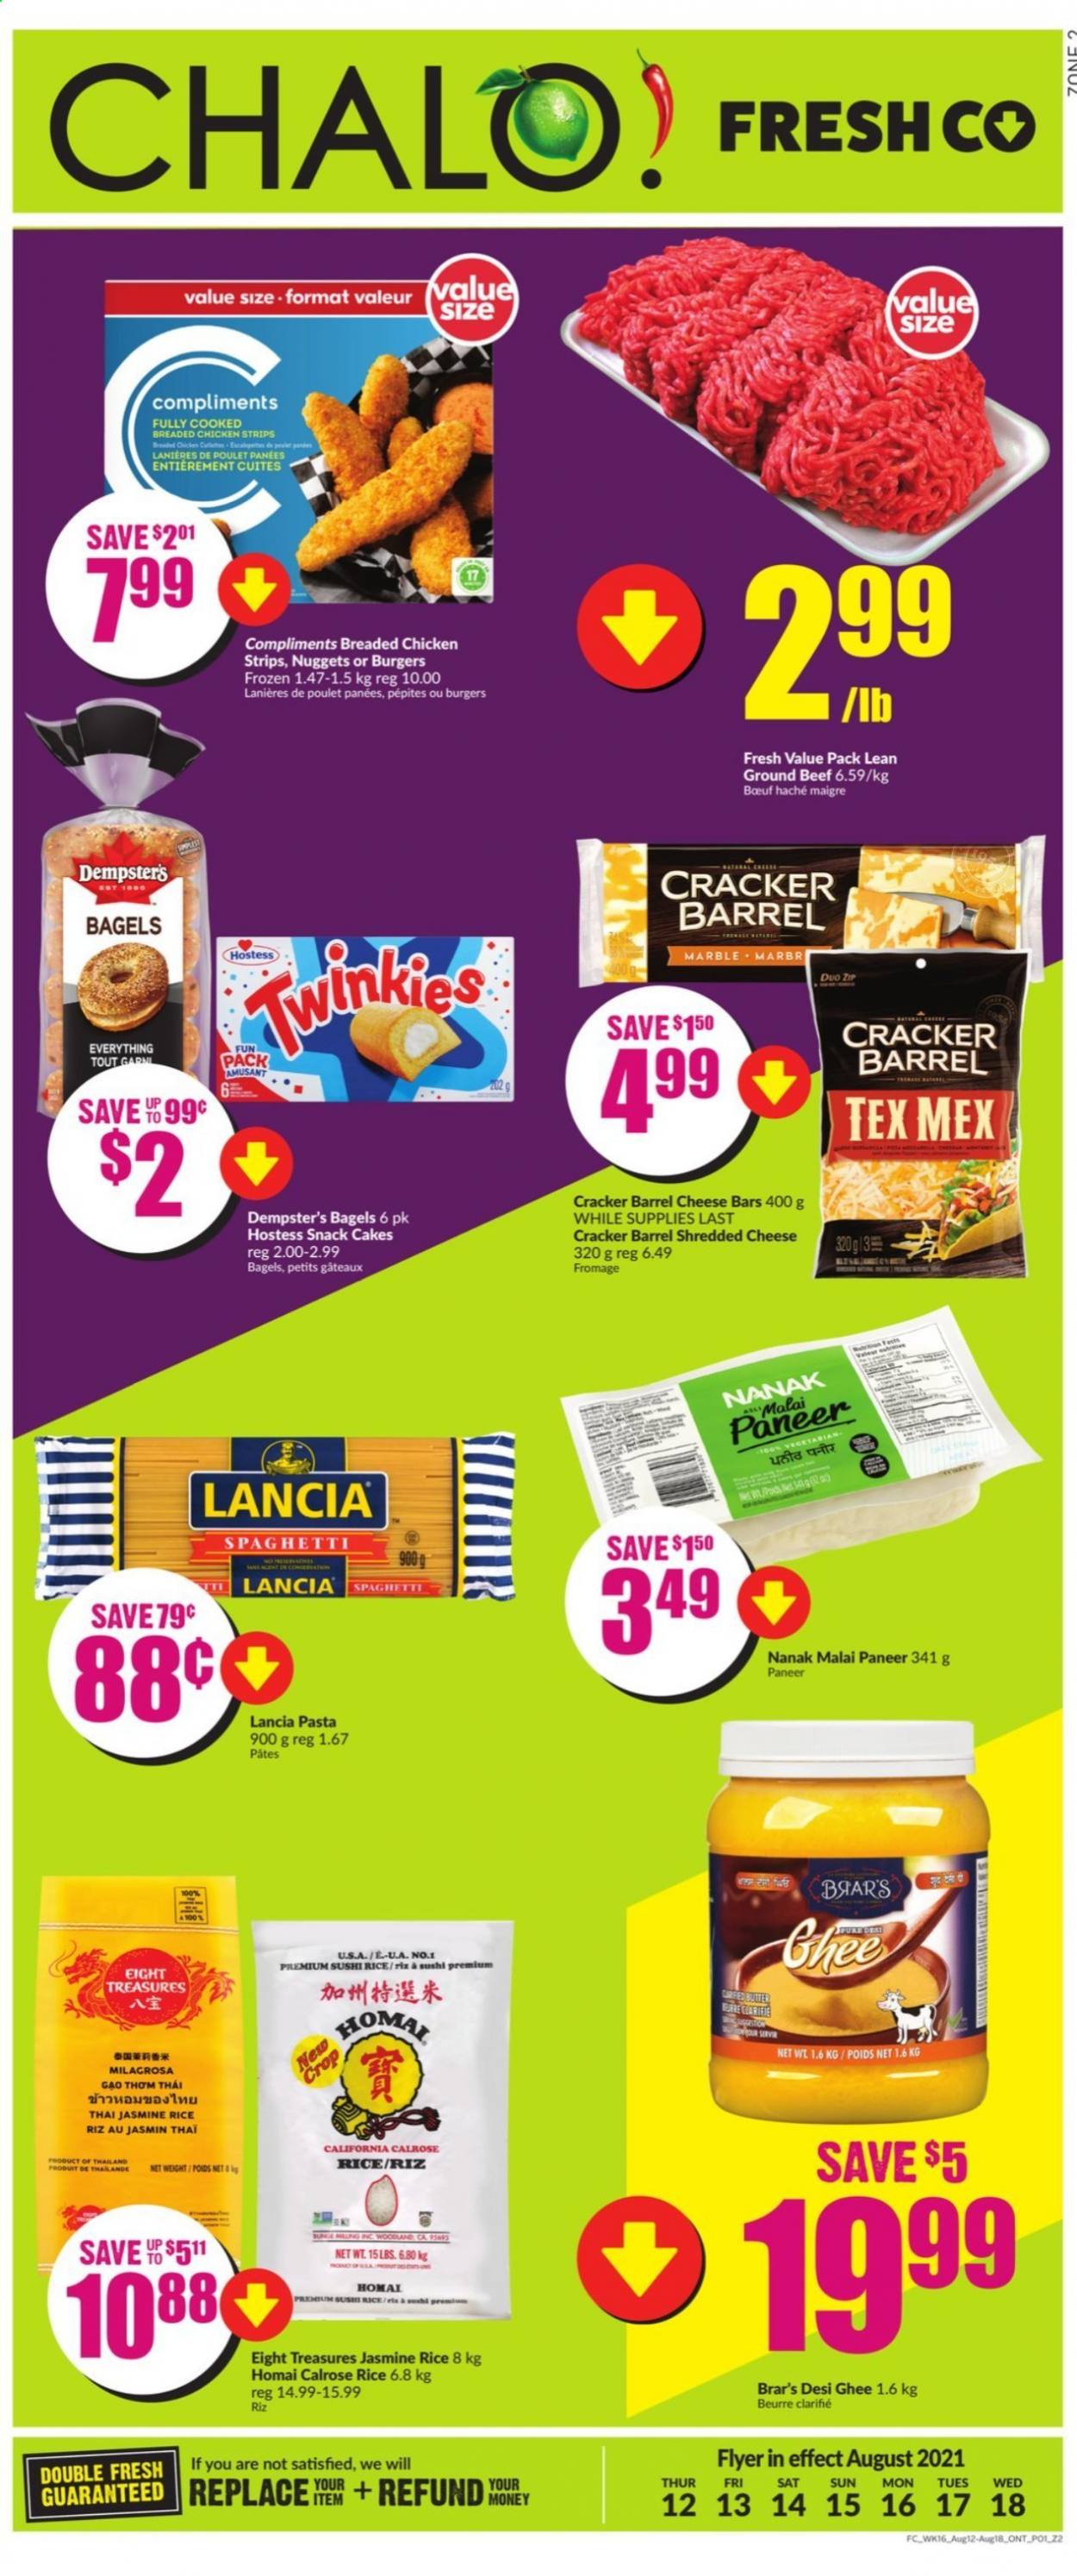 thumbnail - Chalo! FreshCo. Flyer - August 12, 2021 - August 18, 2021 - Sales products - bagels, cake, spaghetti, nuggets, pasta, fried chicken, shredded cheese, paneer, ghee, strips, chicken strips, snack, crackers, rice, jasmine rice, honey, beef meat, ground beef. Page 1.